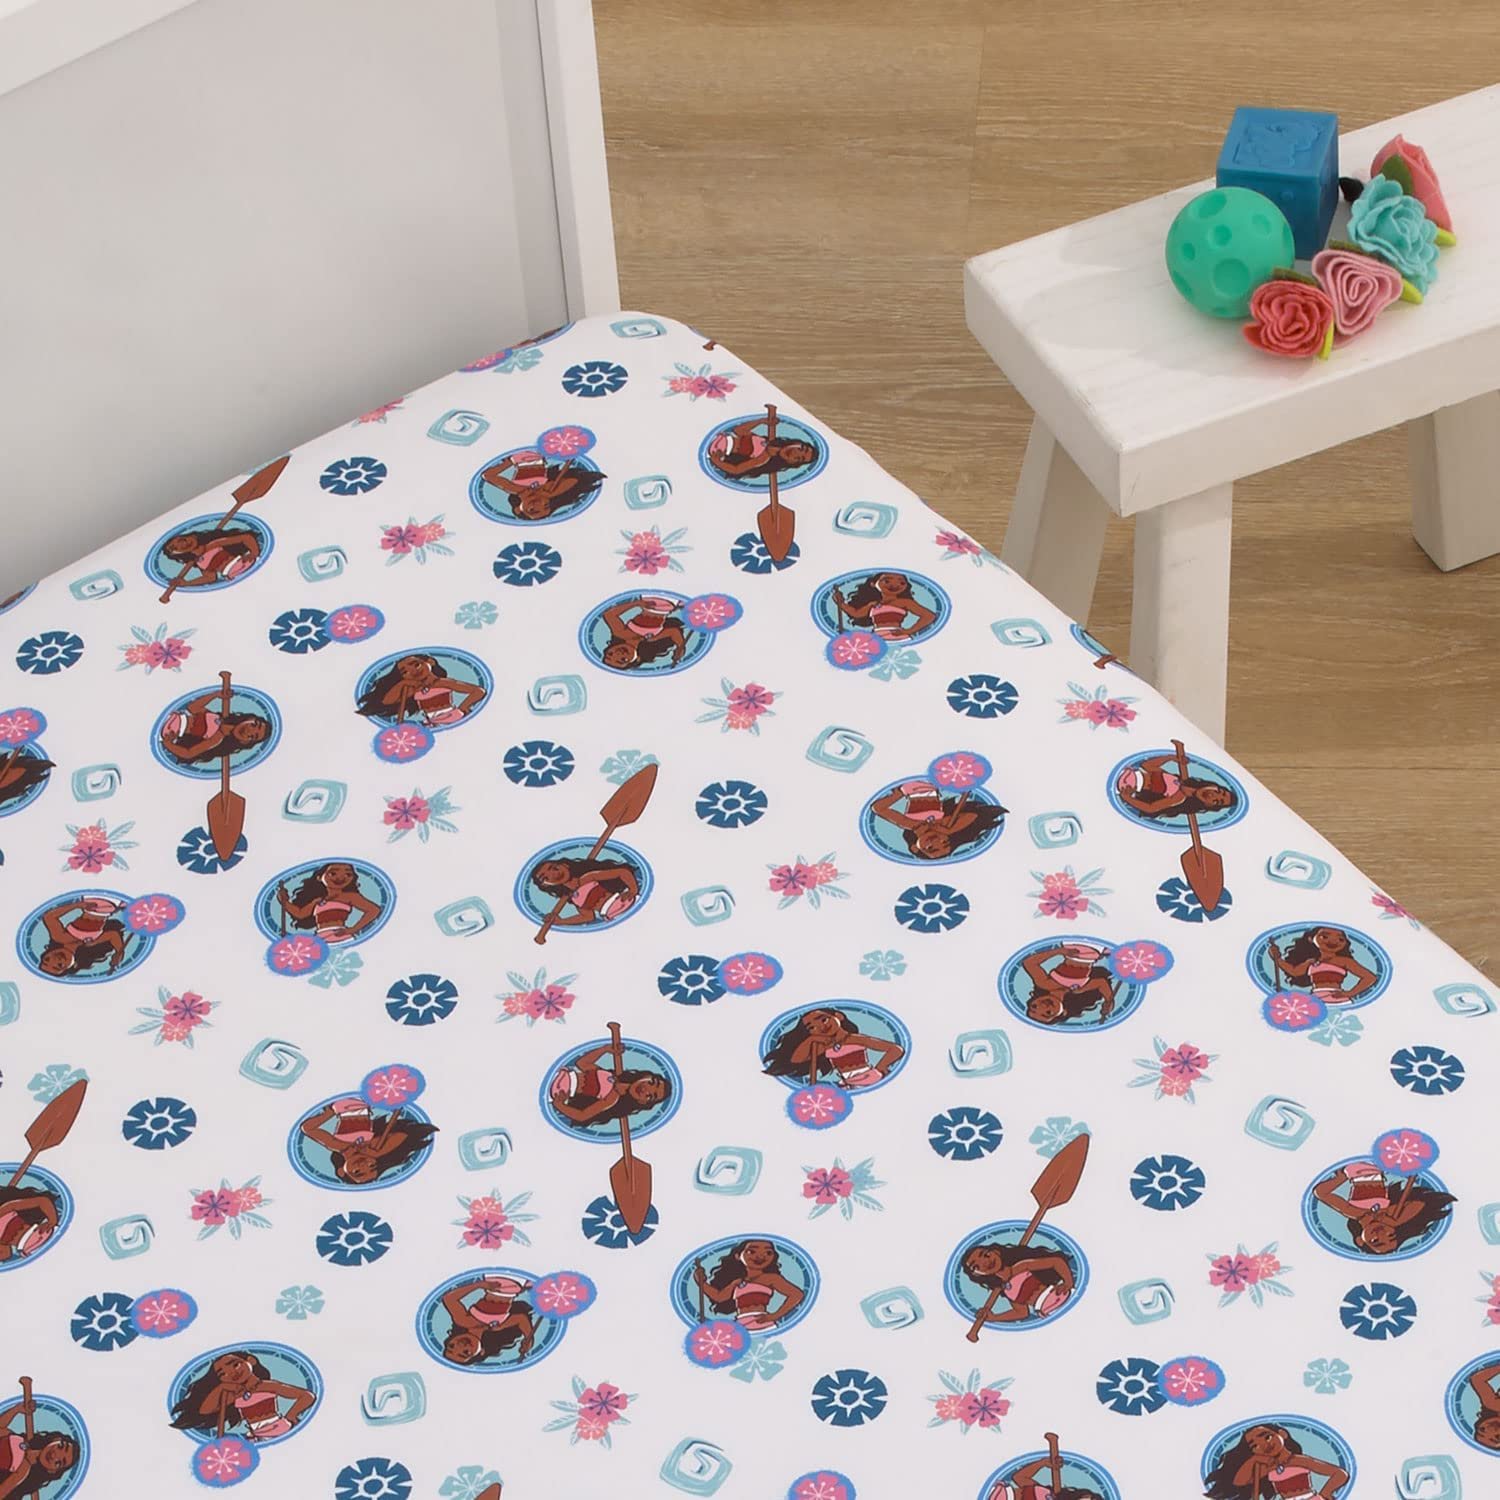 Disney Moana Fitted Crib Sheet 100% Soft Microfiber, Baby Sheet, Fits Standard Size Crib Mattress 28in x 52in - image 3 of 4